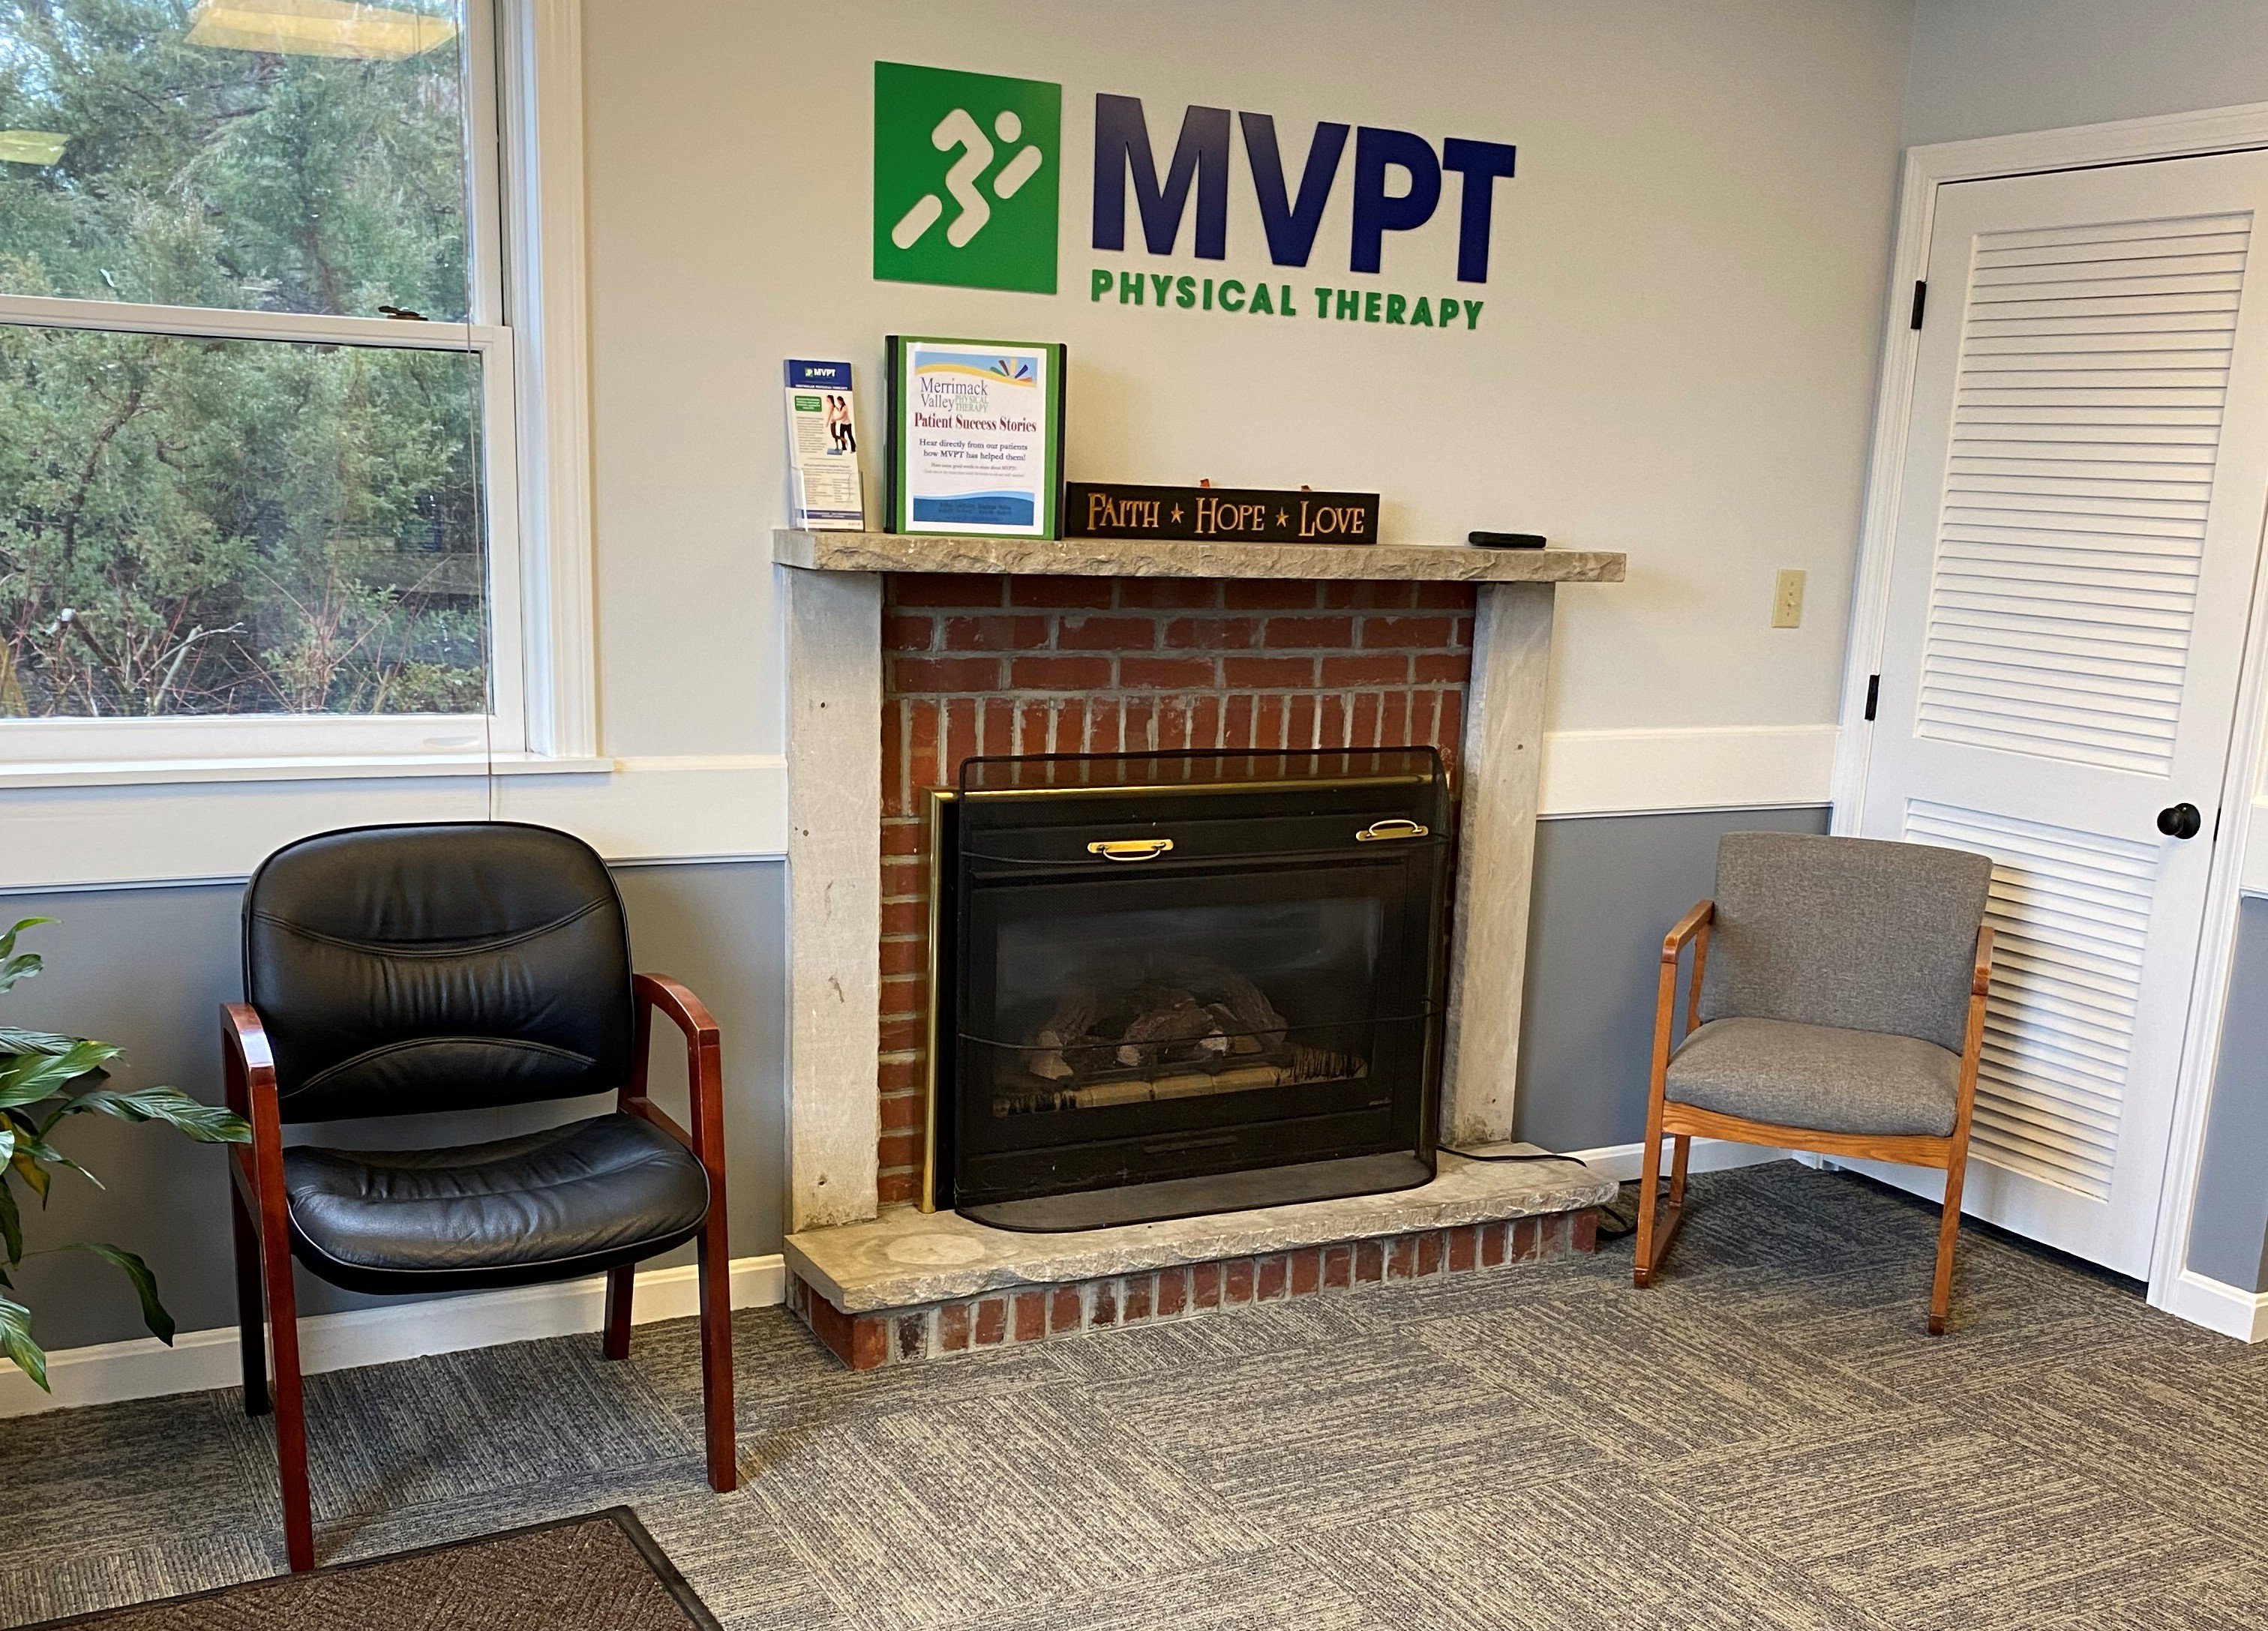 Electrical Stimulation Bedford, Manchester, derry, Nashua, NH - MVPT